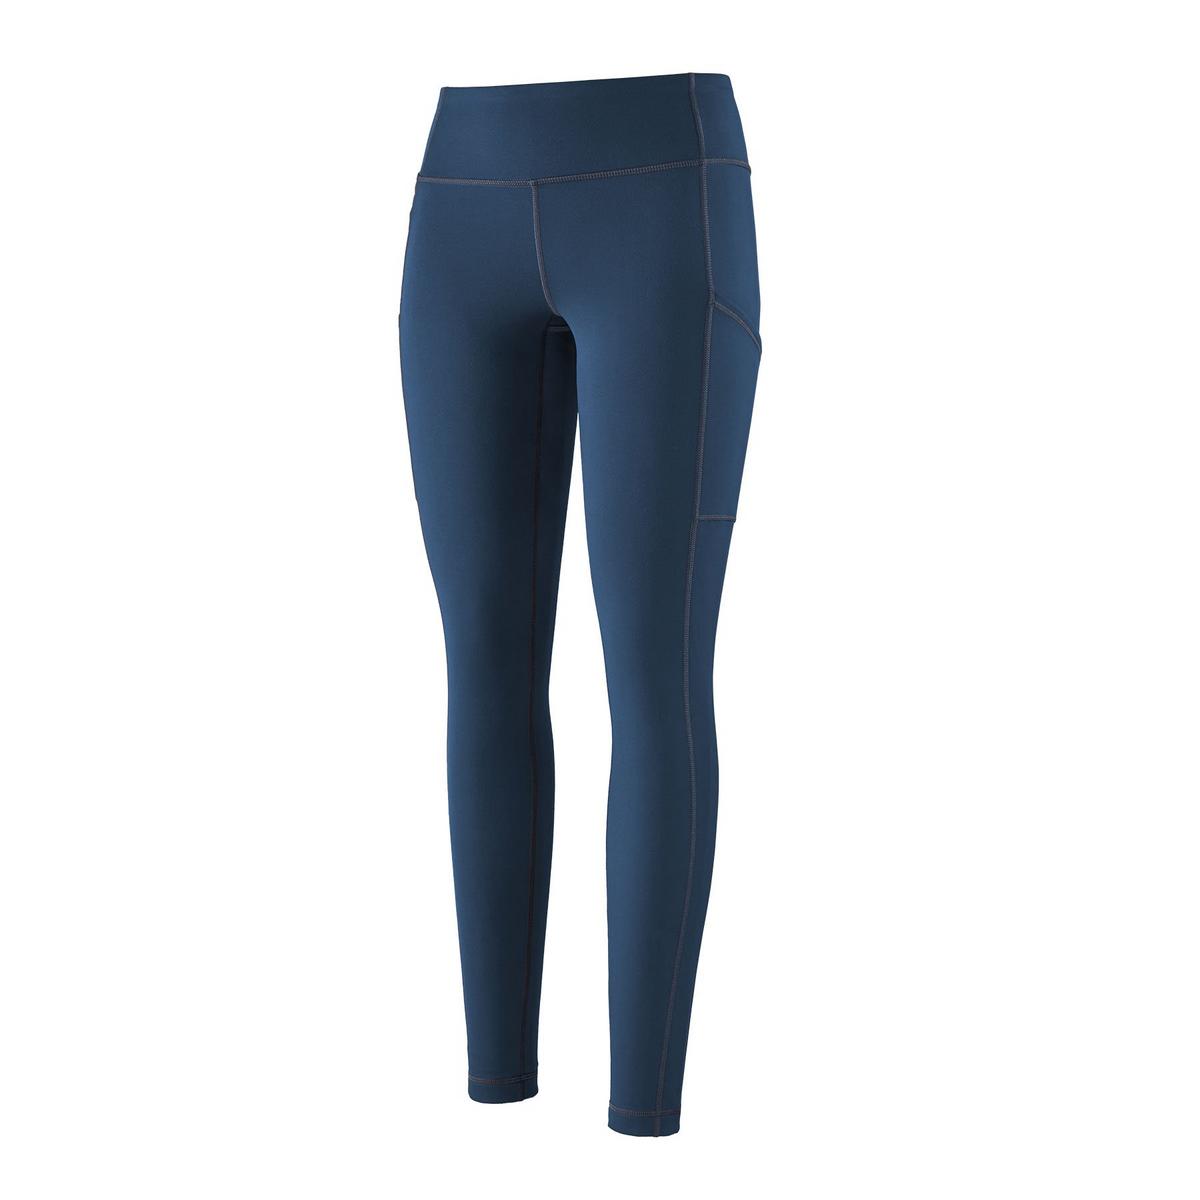 Patagonia Women's Pack Out Tights - Tidepool Blue